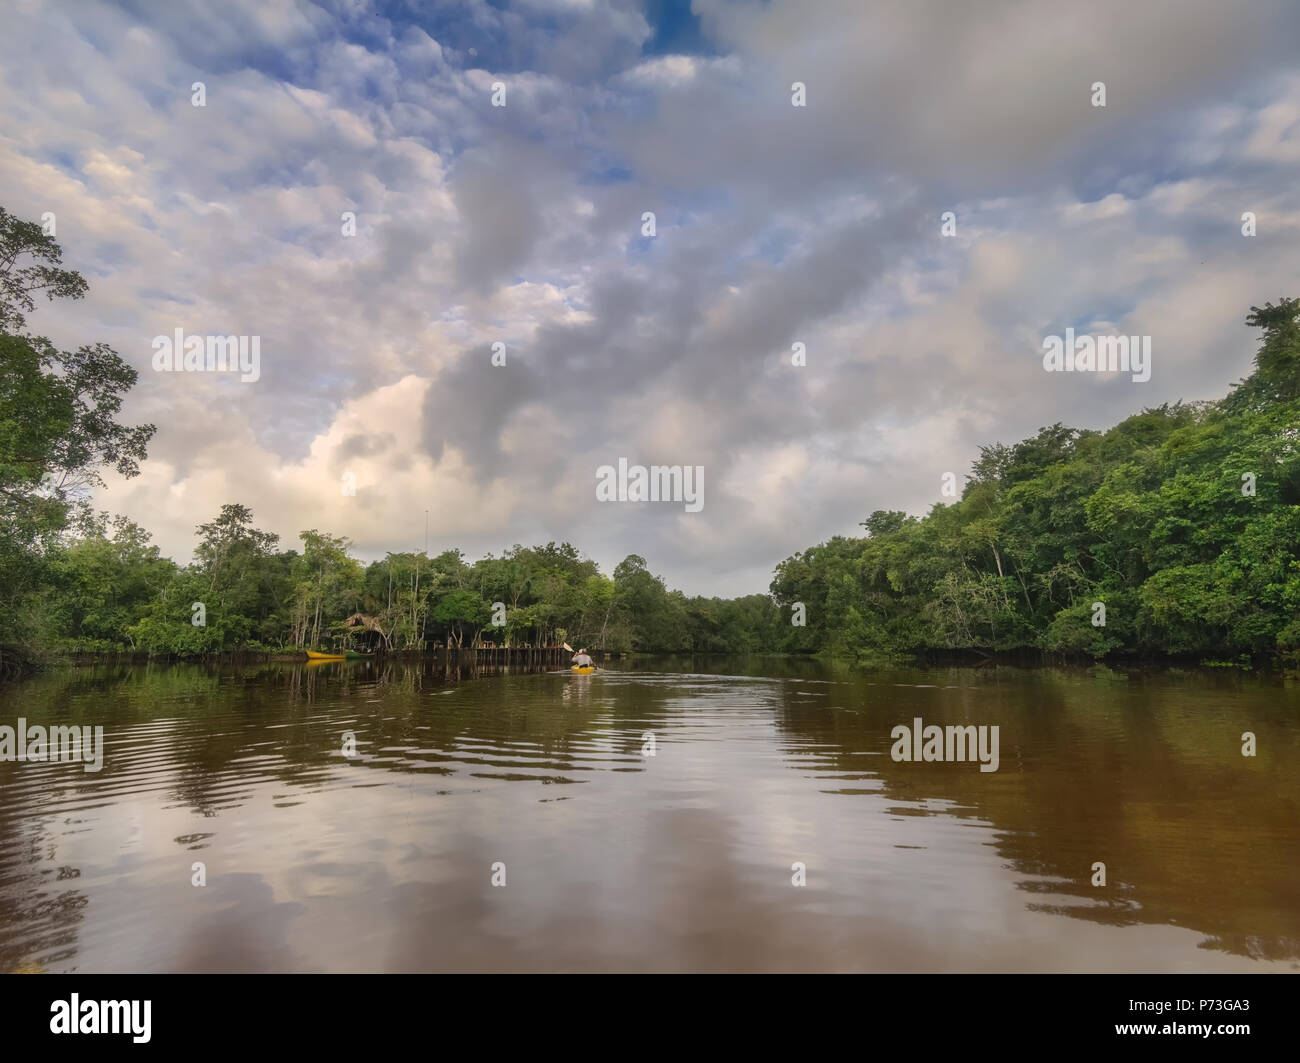 View of the village on the banks of the tropical Orinoco river. Stock Photo